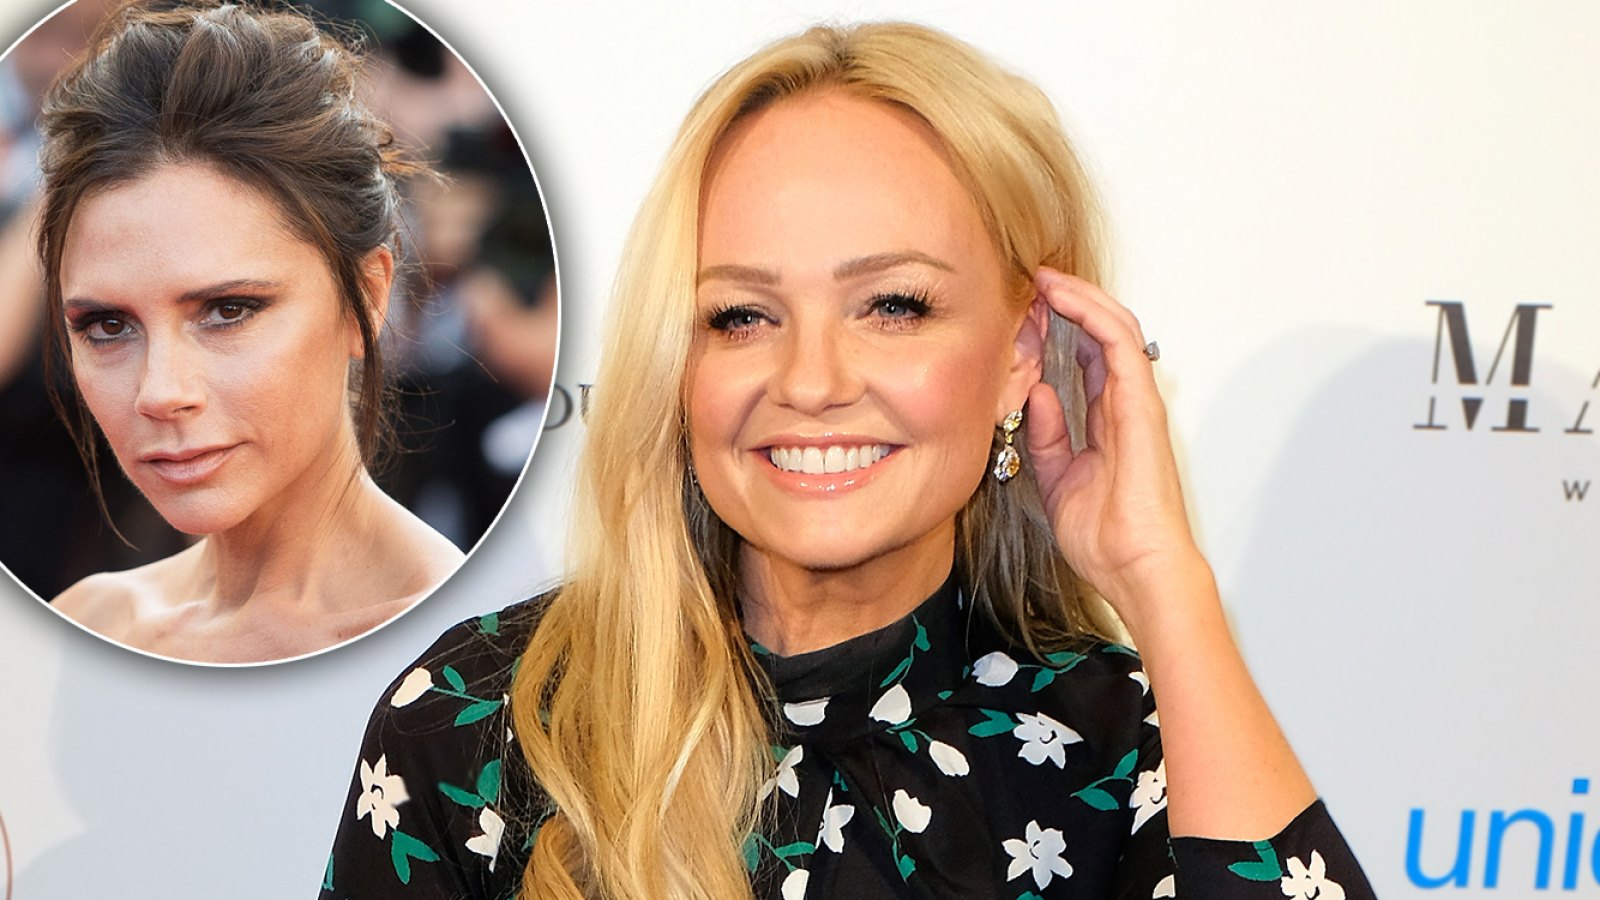 Emma Bunton: Victoria Is Totally Going to Watch Our Show - and We Want Adele to Collab!